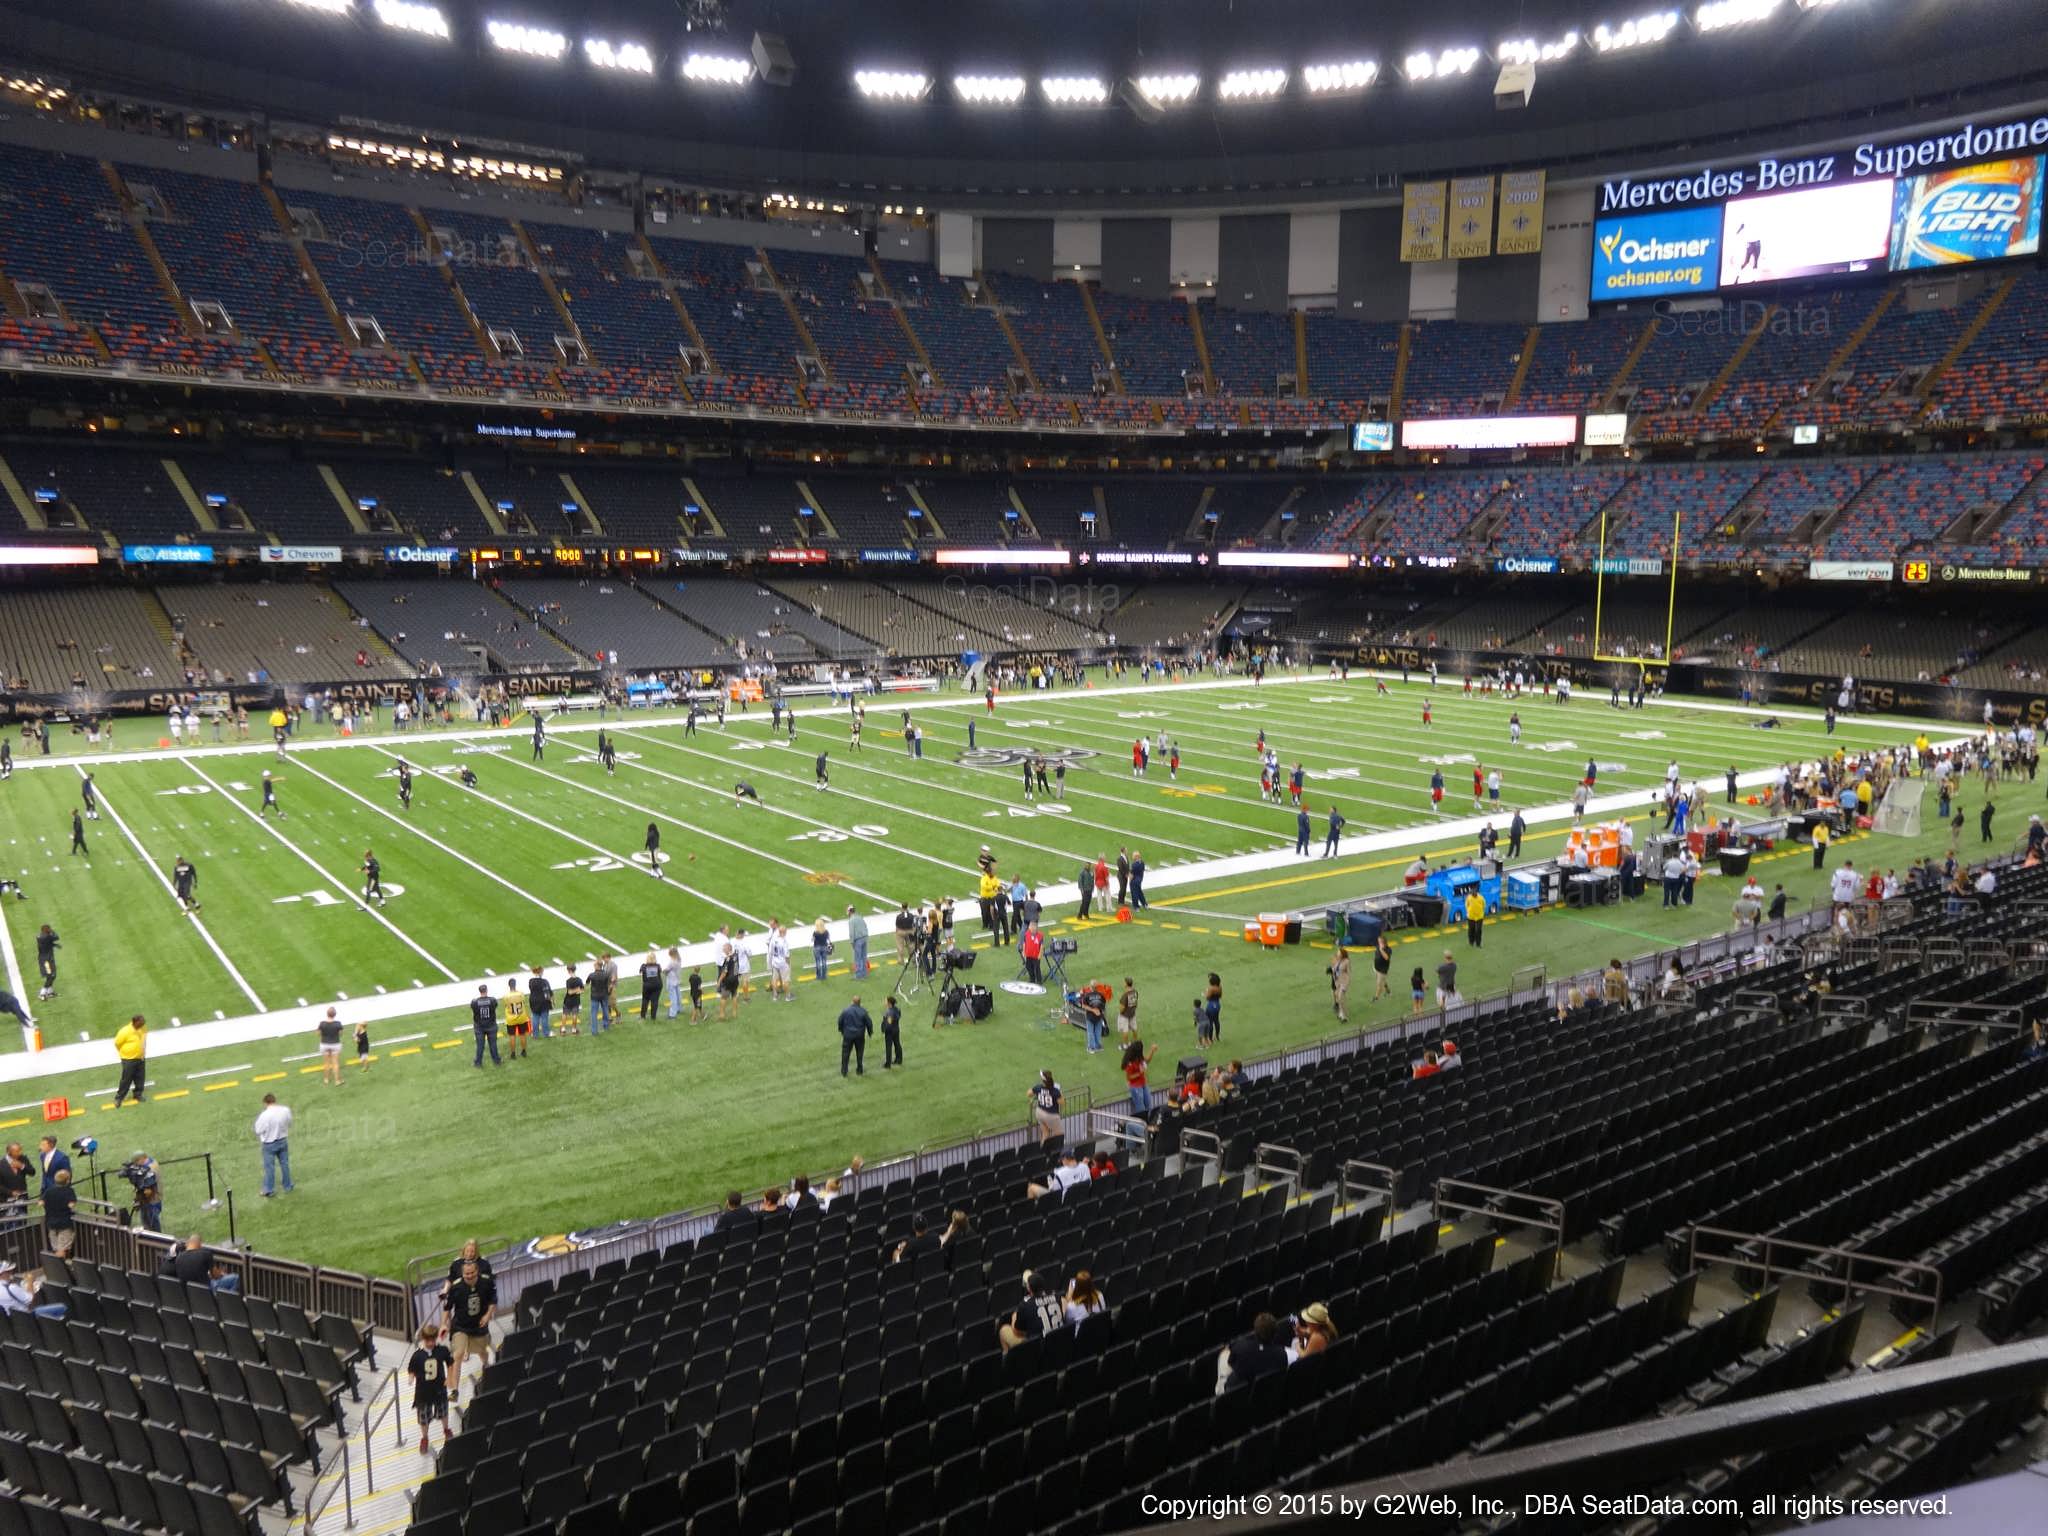 Seat view from section 230 at the Mercedes-Benz Superdome, home of the New Orleans Saints